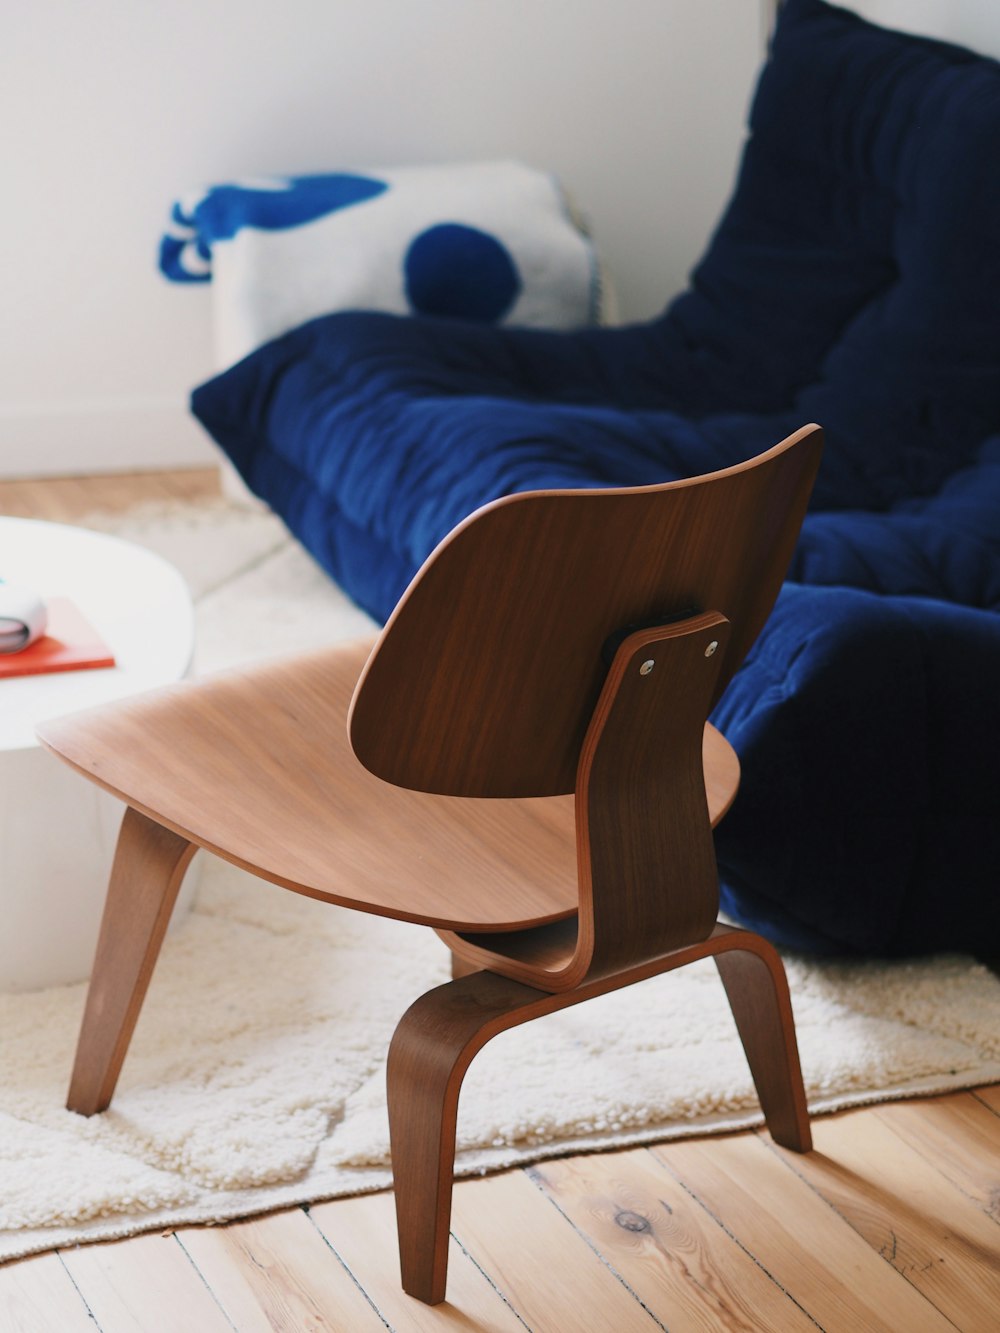 a wooden chair sitting on top of a hard wood floor